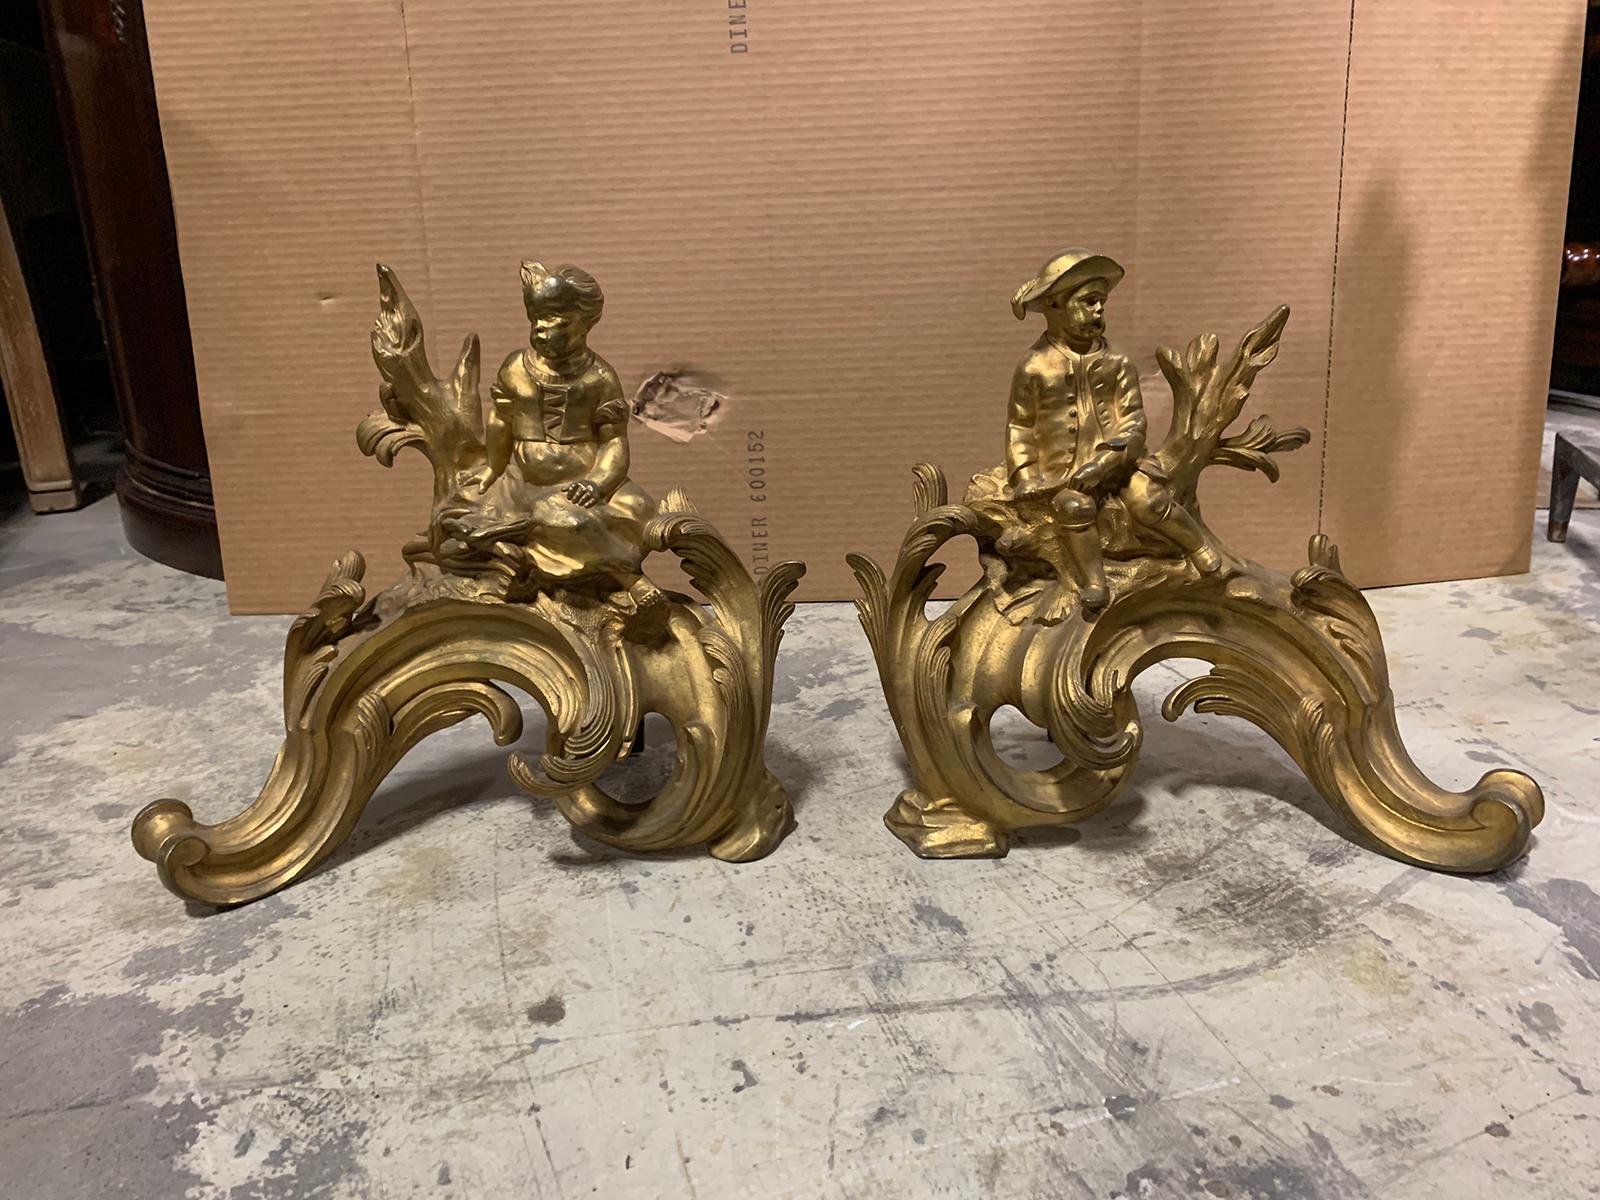 Pair of 19th century gilt bronze fireplace chenets with figures.